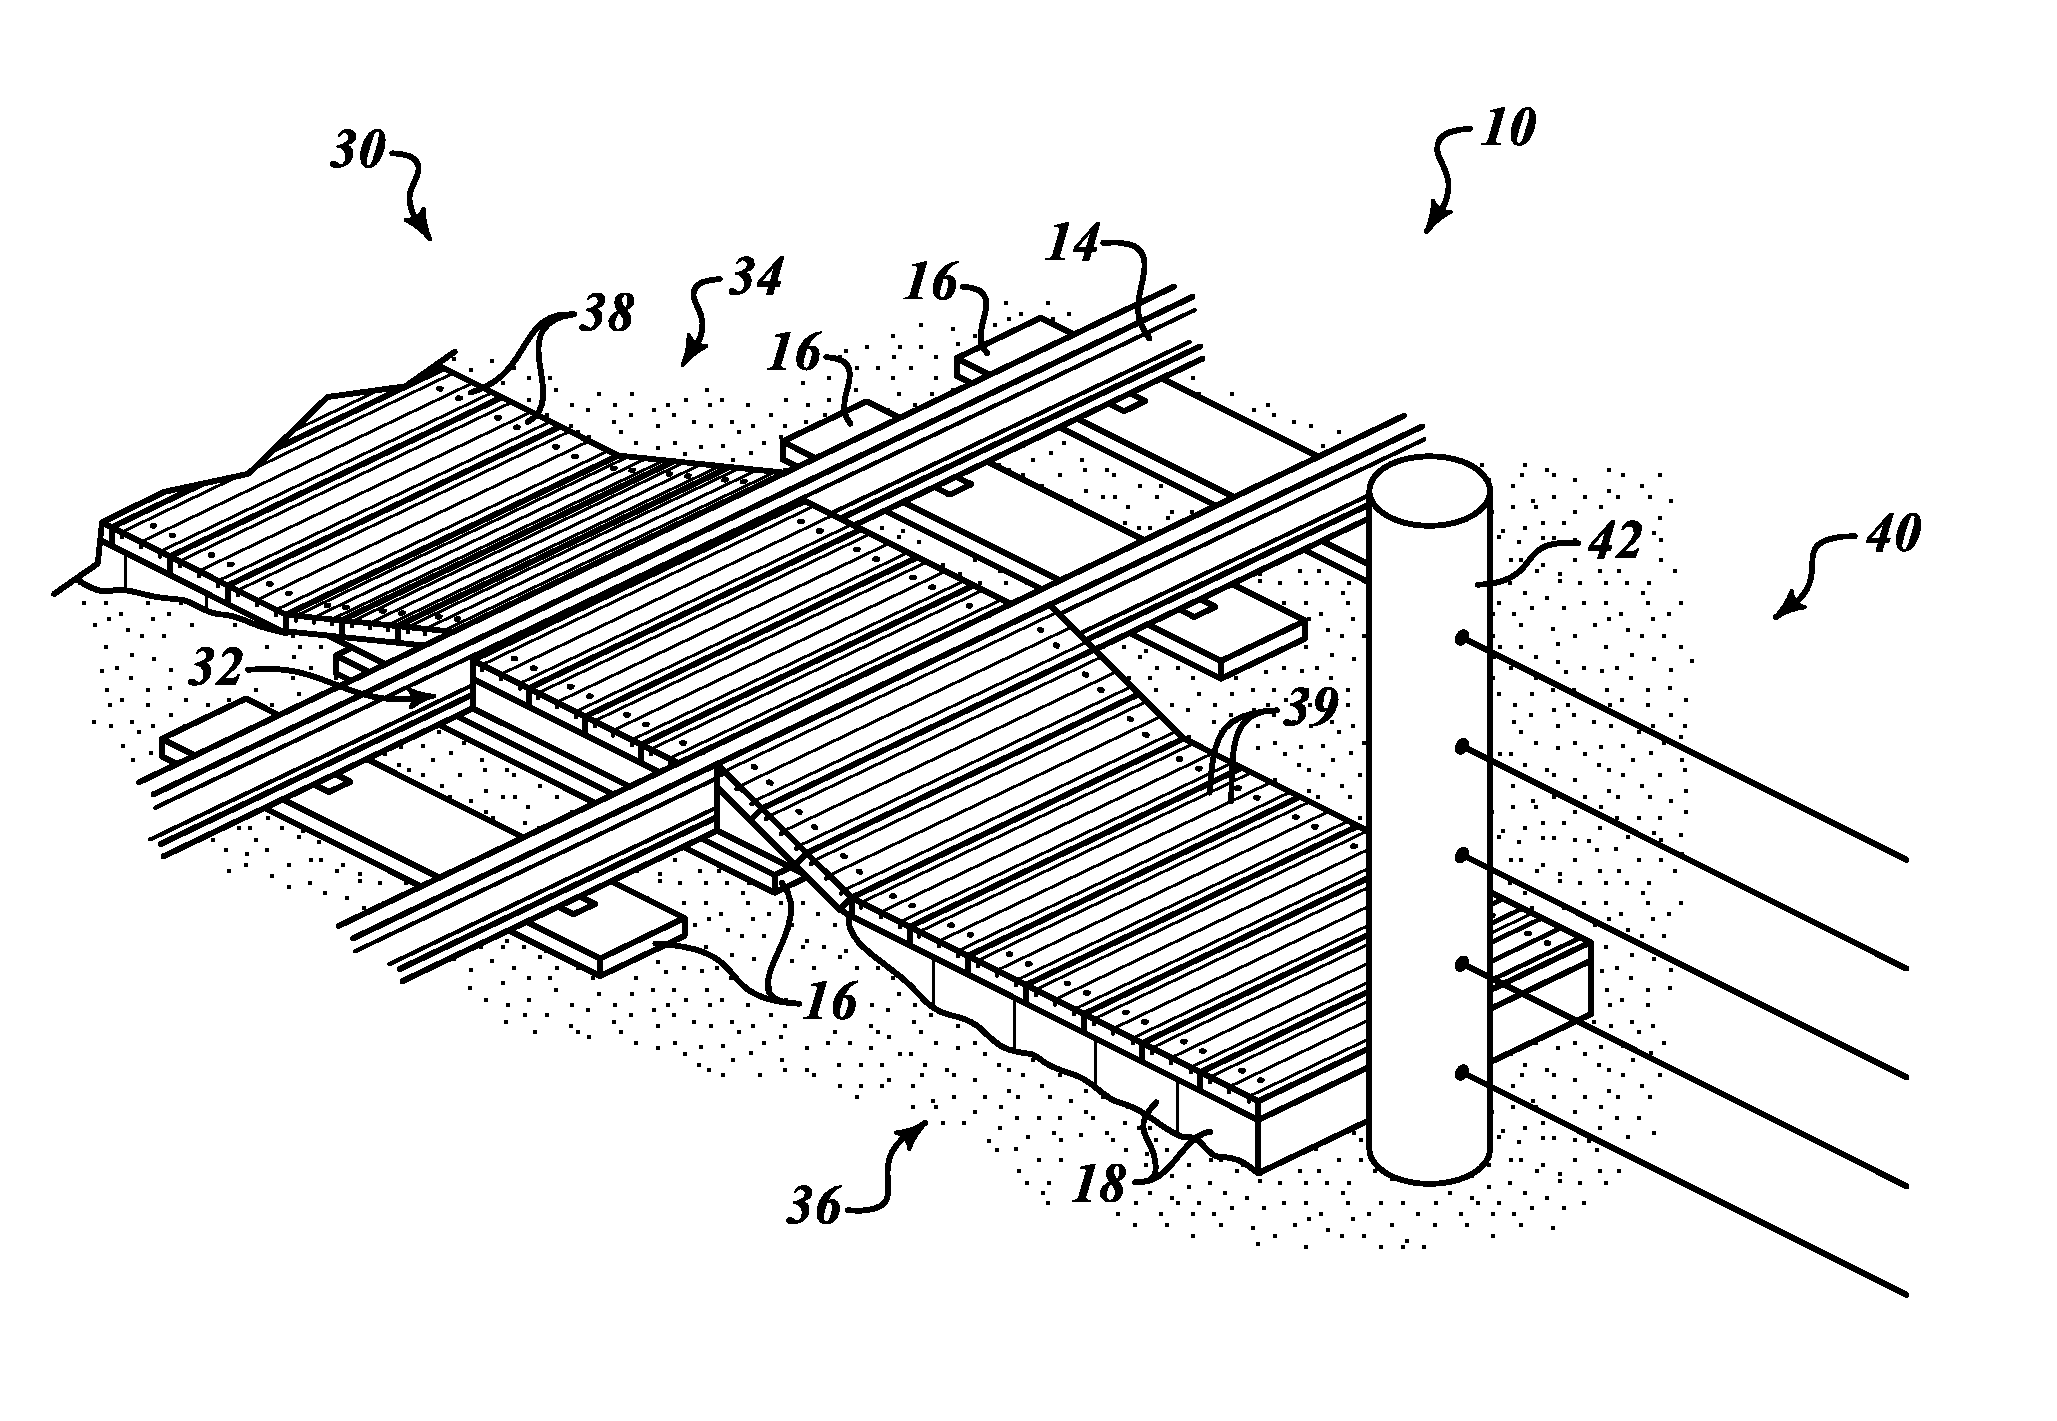 Wildlife exclusion systems and methods for railway tracks